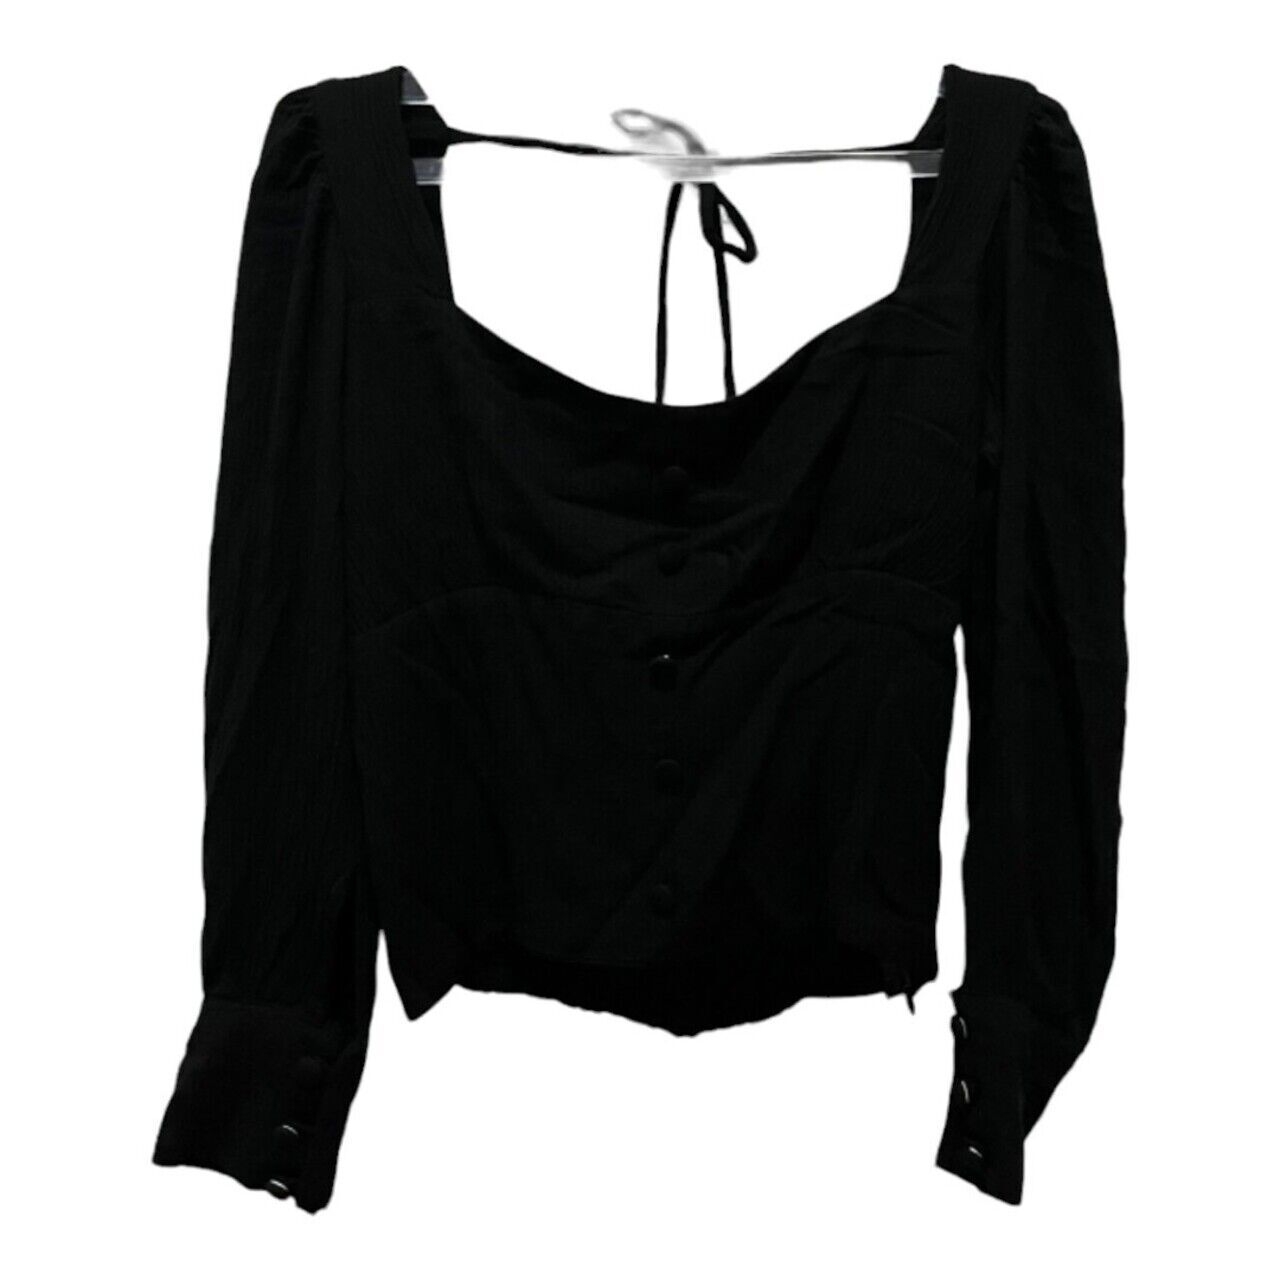 With Love Black Blouse